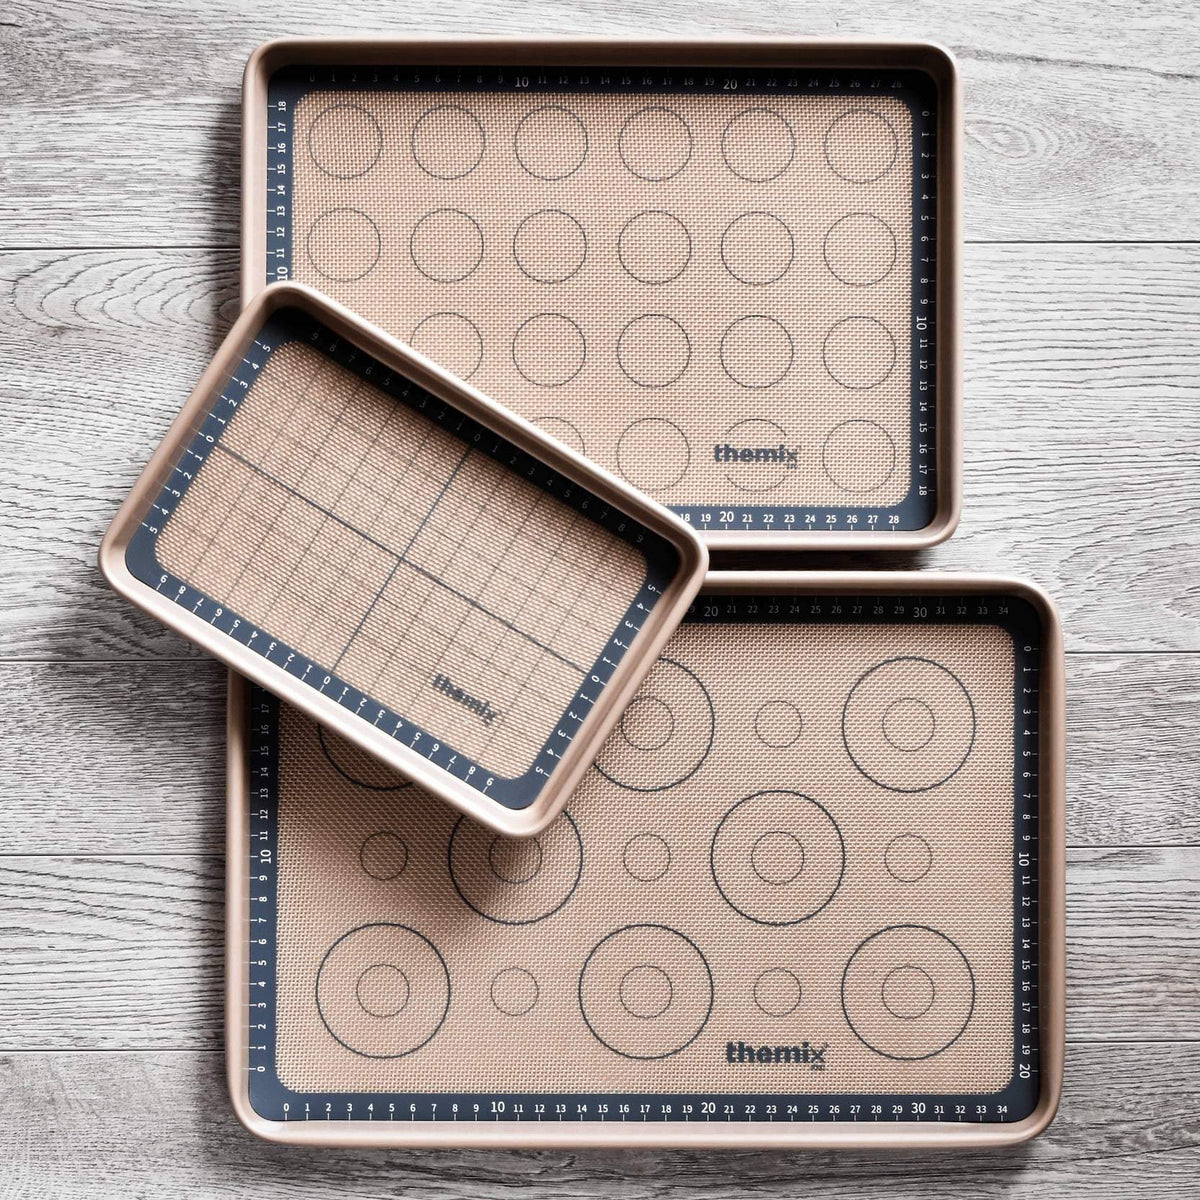 Reusable Non Stick Baking Tray Liners